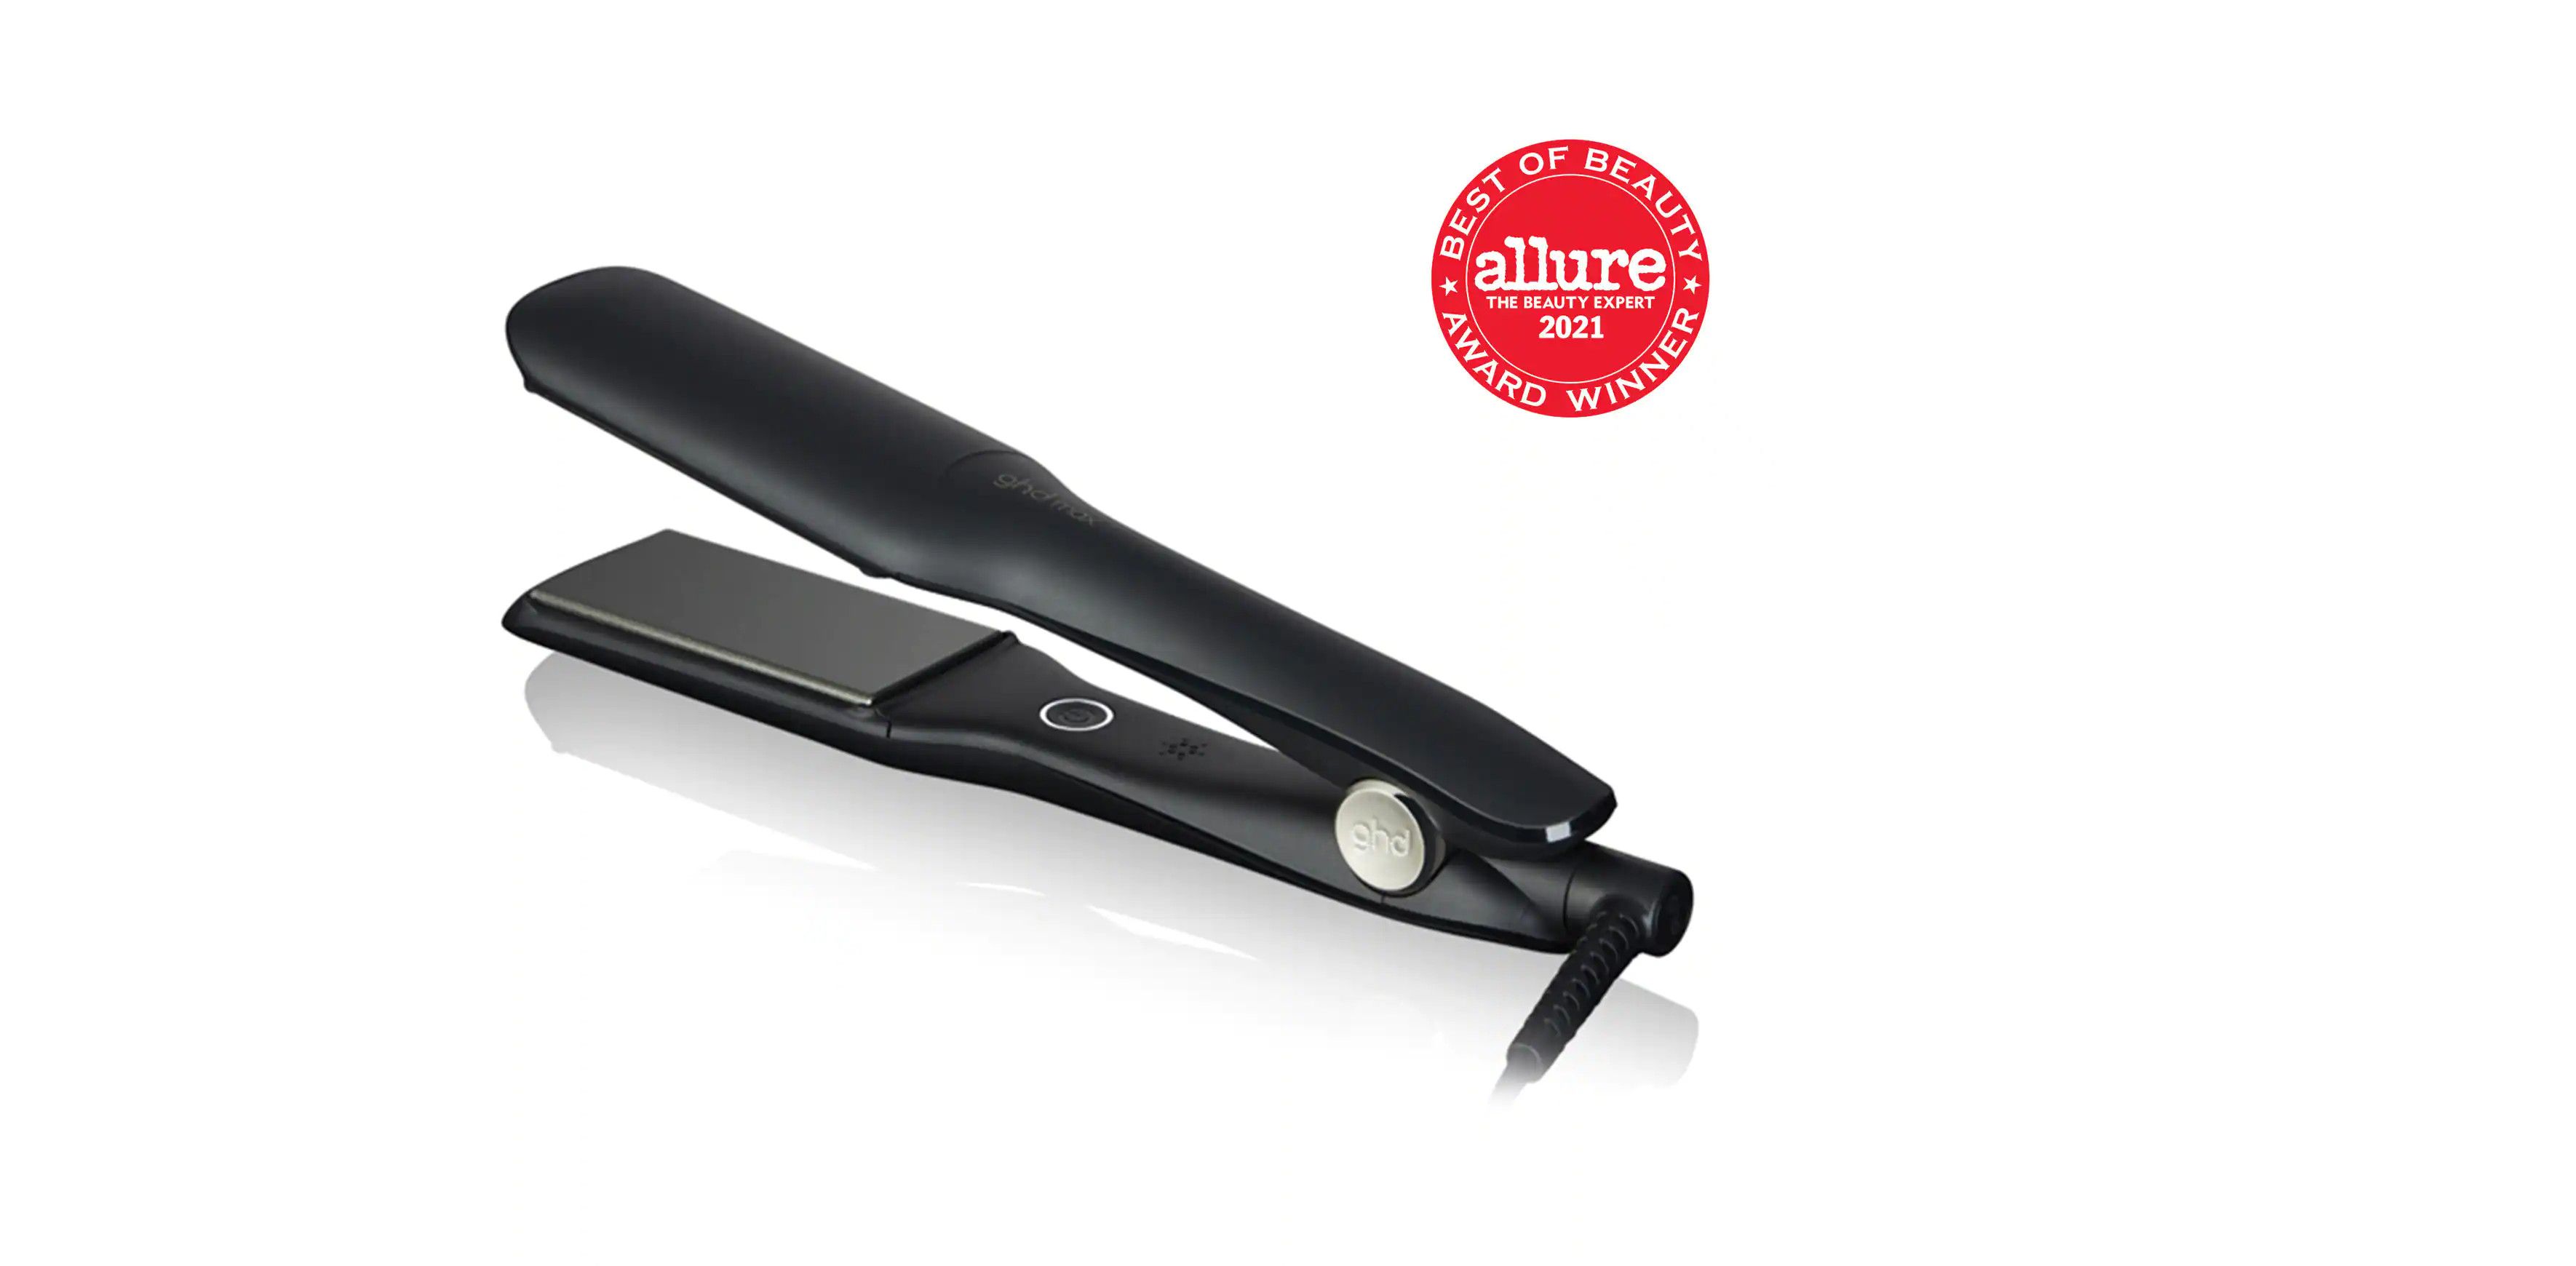 GHD MAX STYLER - 2" WIDE PLATE FLAT IRON | ghd (US)